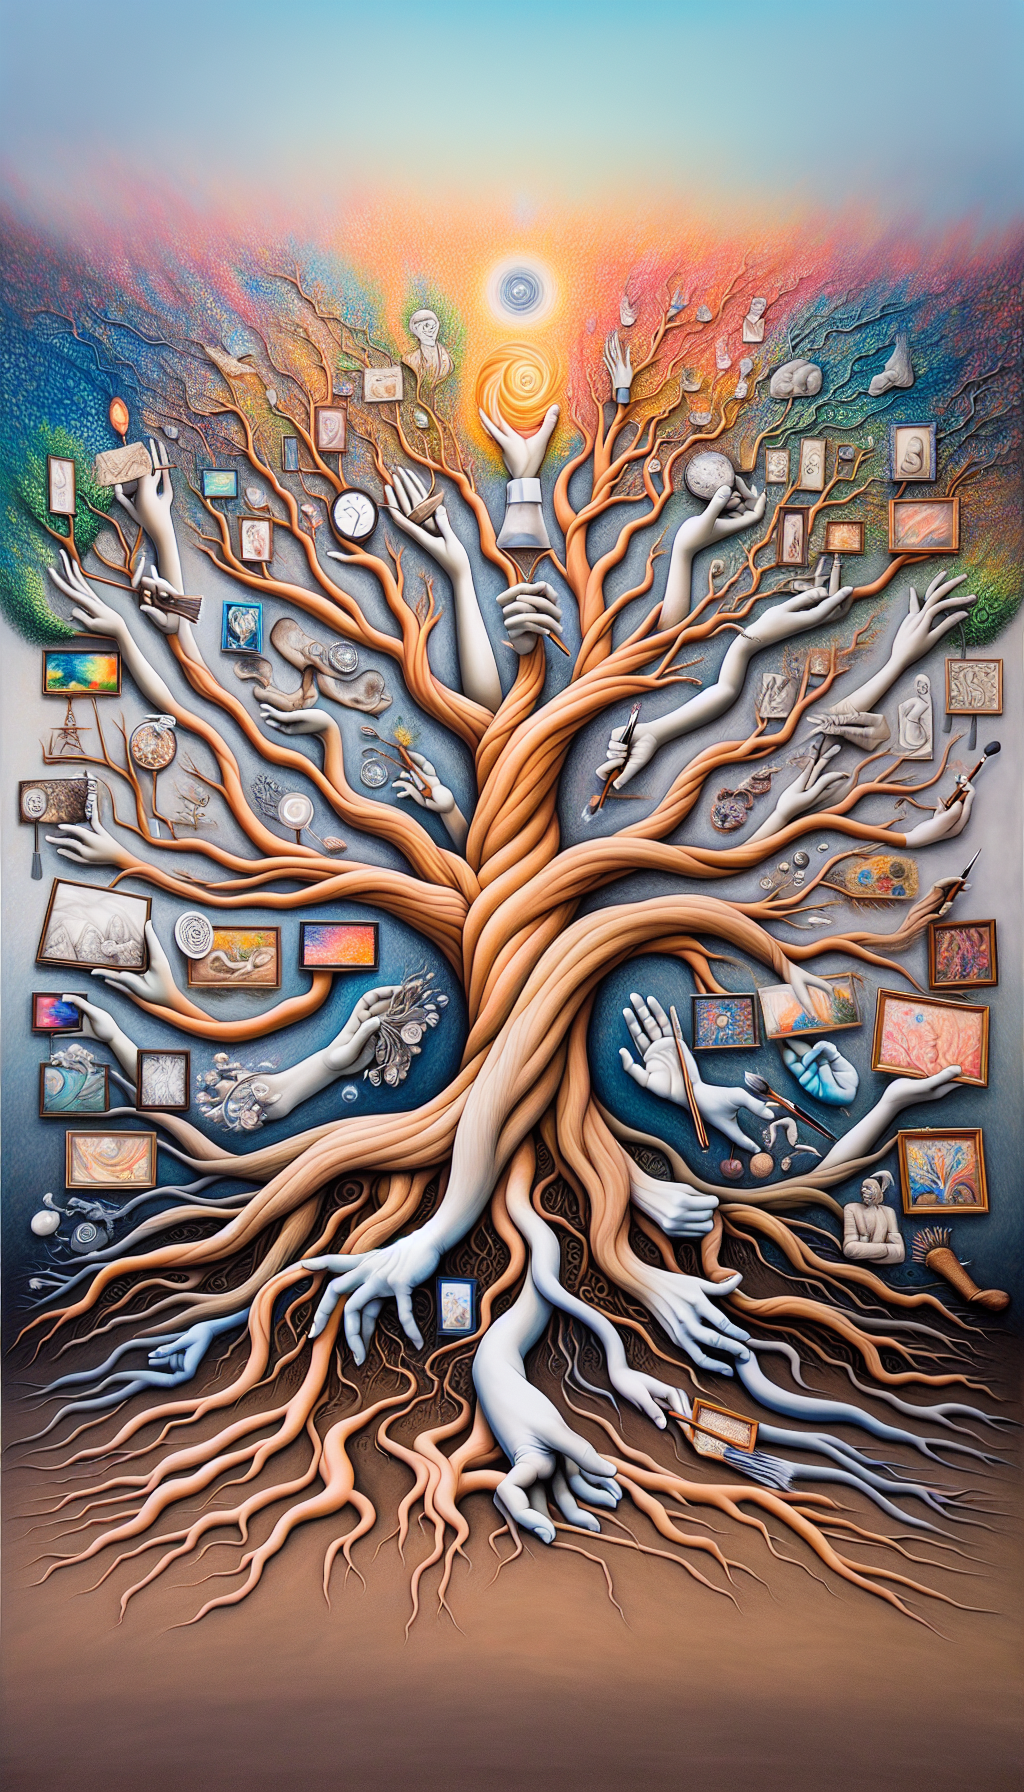 A whimsical tree's branches morph into elegant hands of varying ages, each holding a timeless art piece representative of its era, from cave paintings to digital art. The roots delve into a vibrant palette, symbolizing the foundation of cultural heritage. With each branch a different artistic style—impressionism, abstract, realism—this tableau illustrates the enduring value of arts in connecting generations.